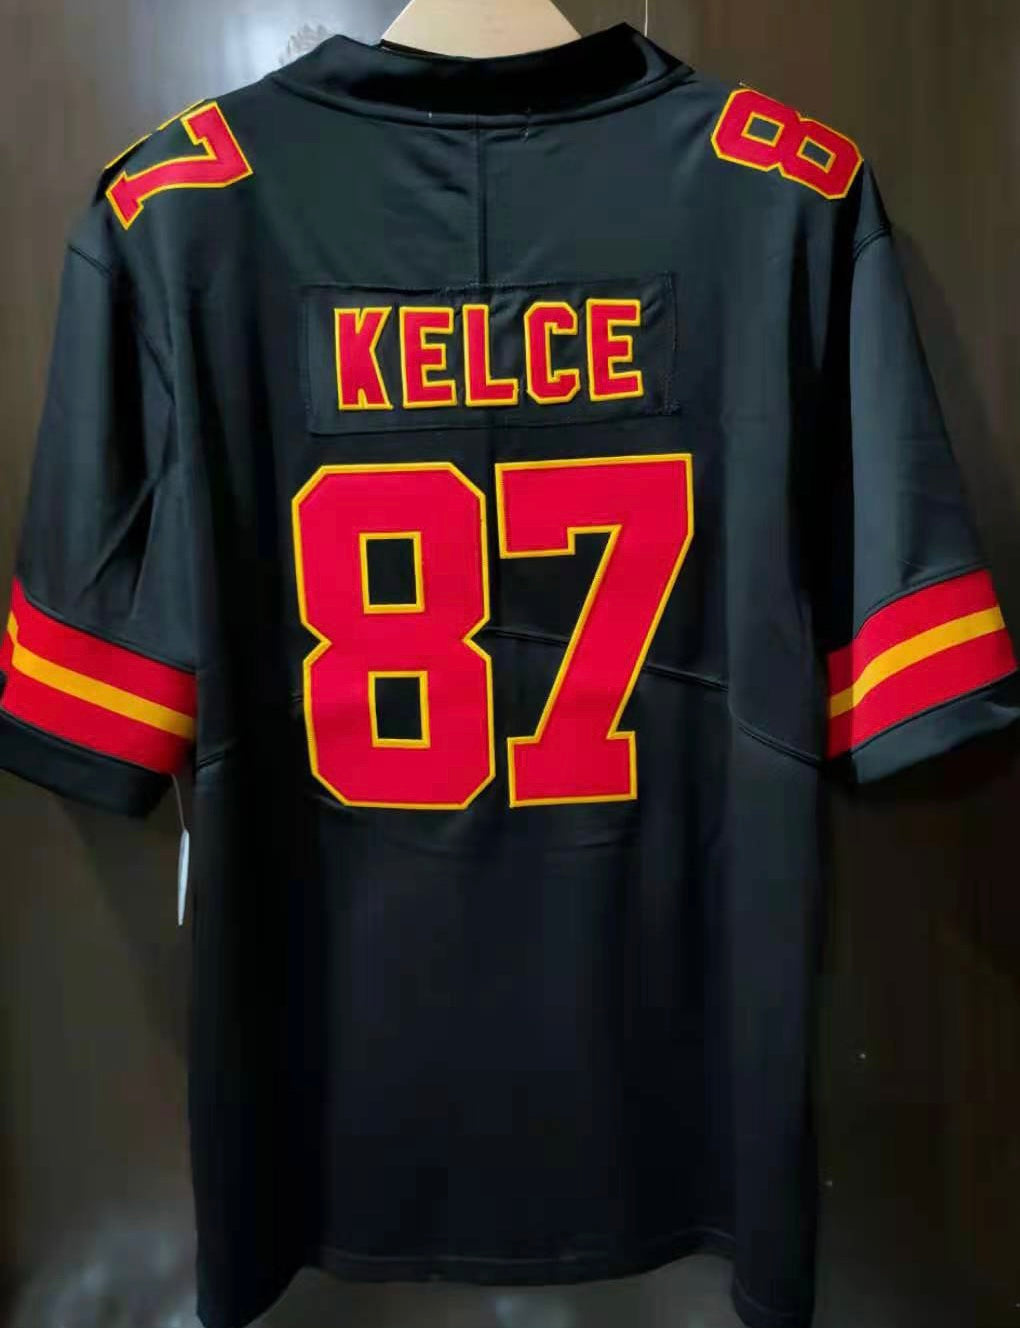 chief's jersey